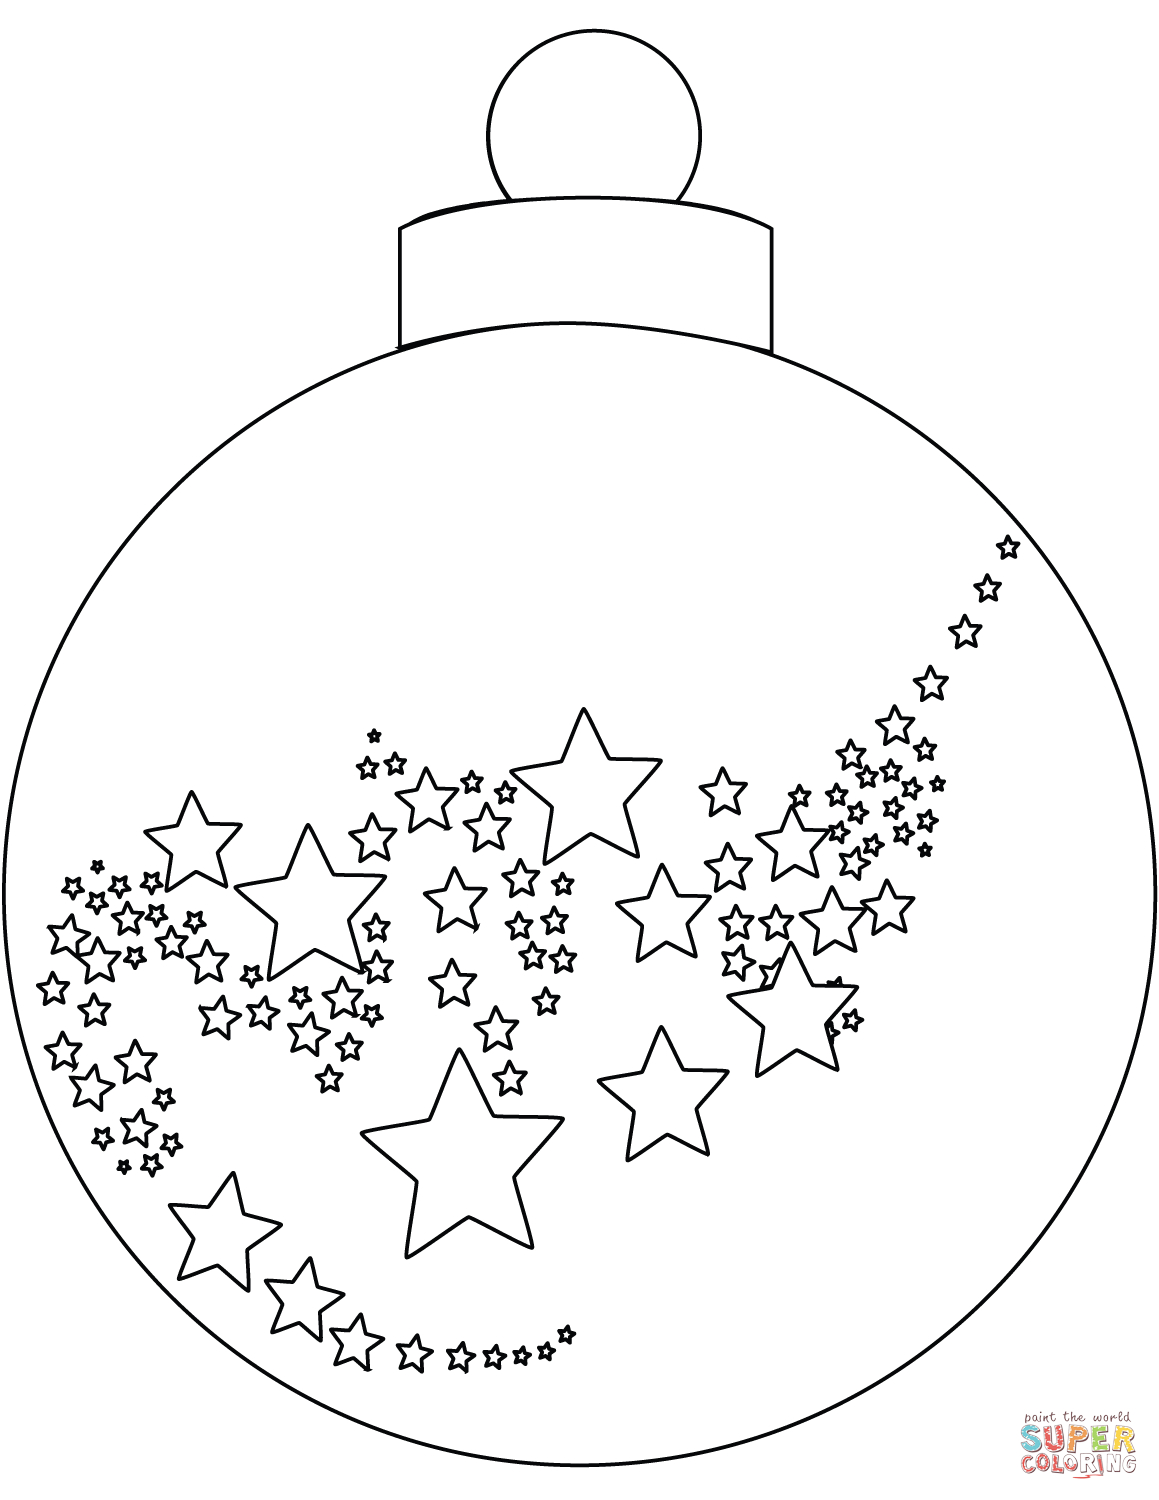 Christmas Ornament Coloring Page | Free Printable Coloring Pages - Free Printable Ornaments To Color